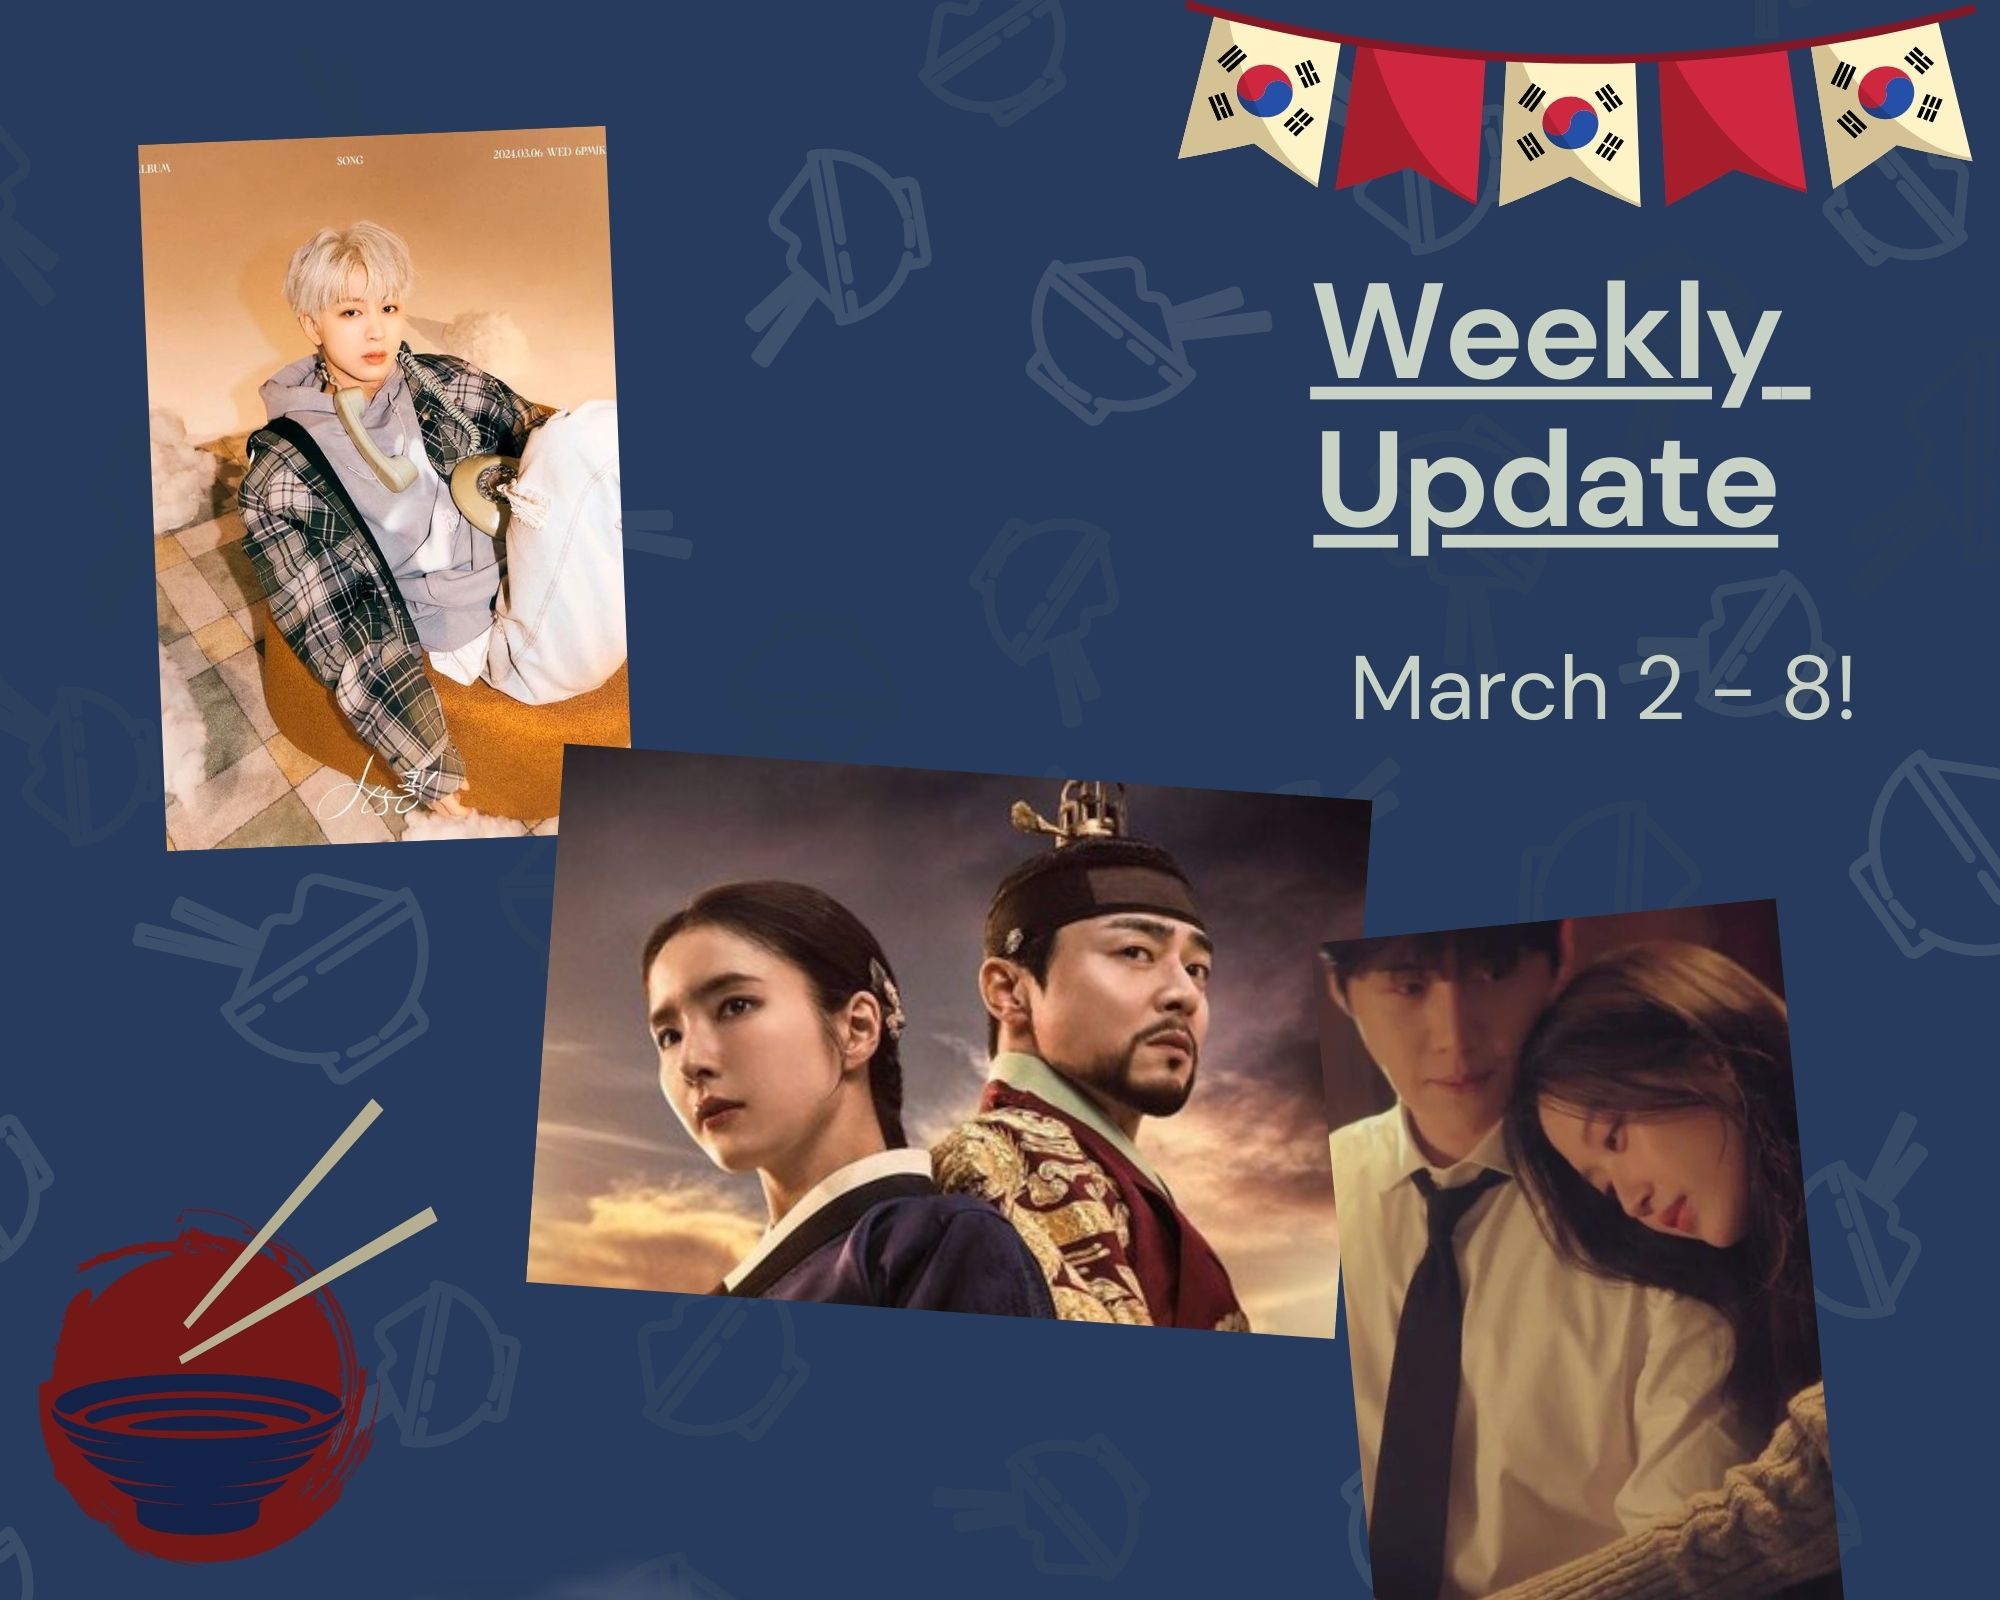 Weekly Update - March 2 - 8